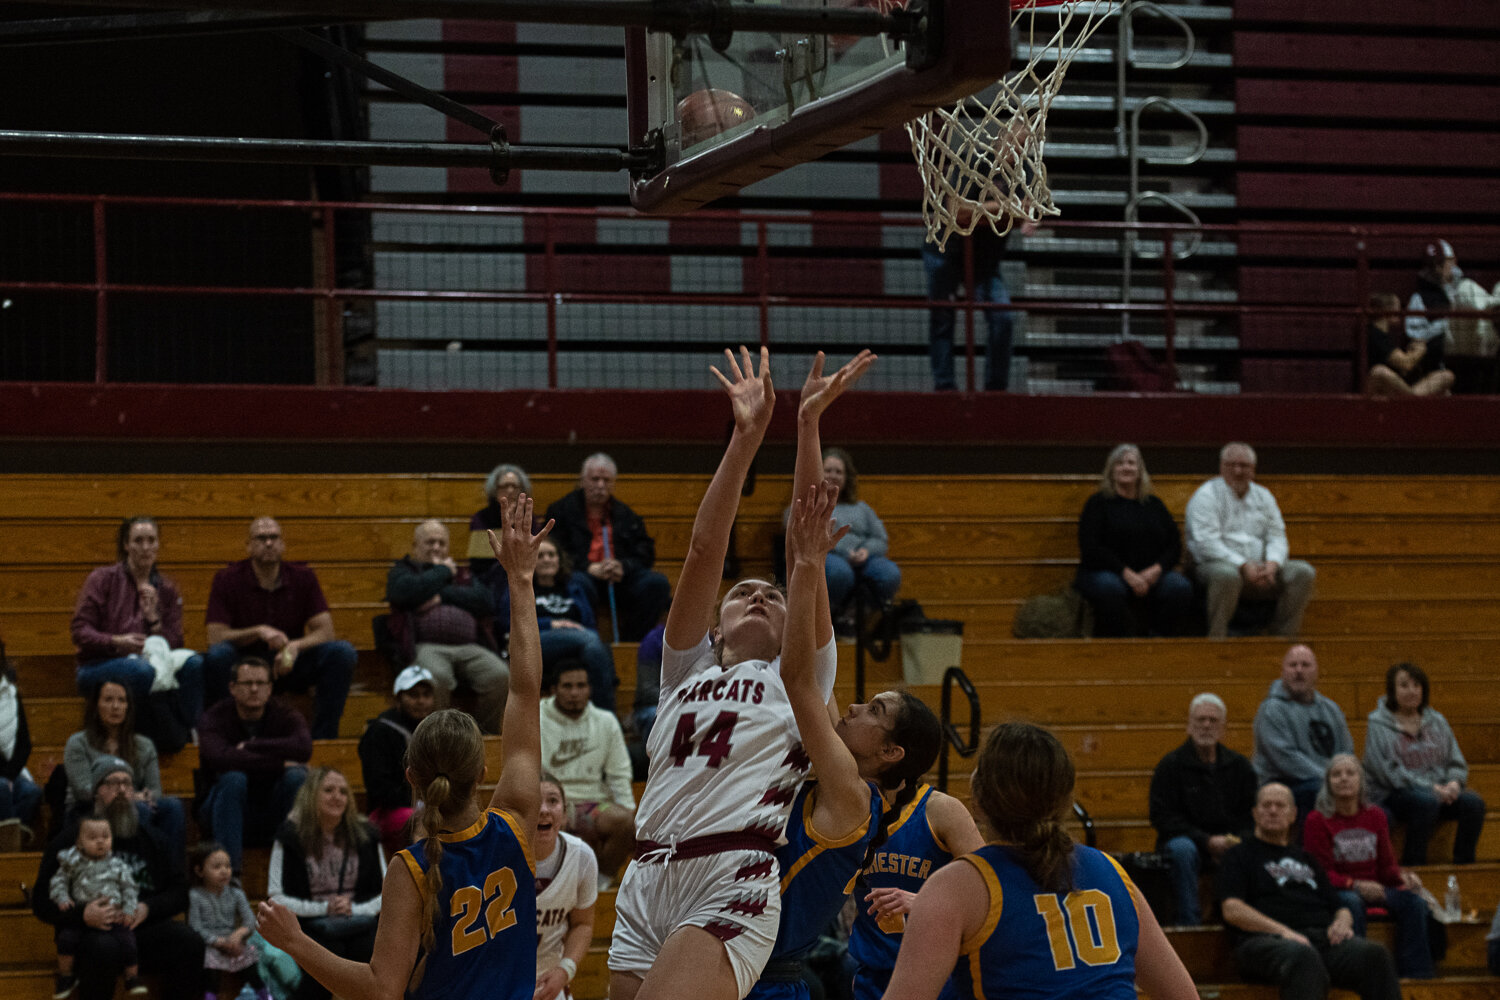 Julia Dalan fights through contact and banks in a bucket during W.F. West's win over Rochester on Dec. 6.